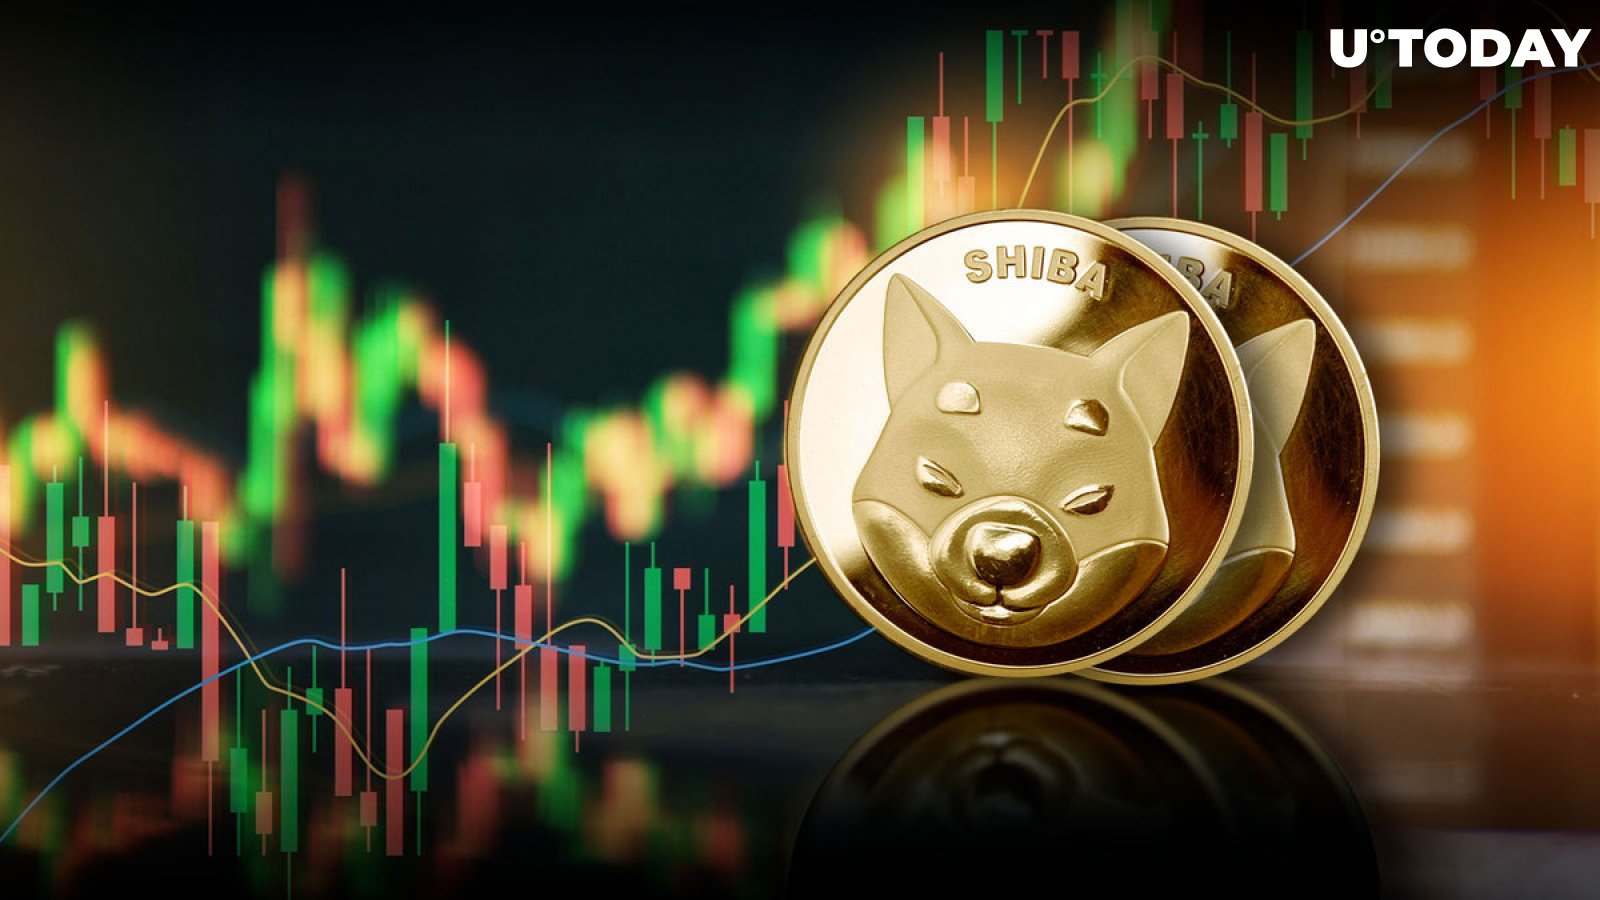 Shiba Inu generates 1,104% in inflows as SHIB price hits two-year high